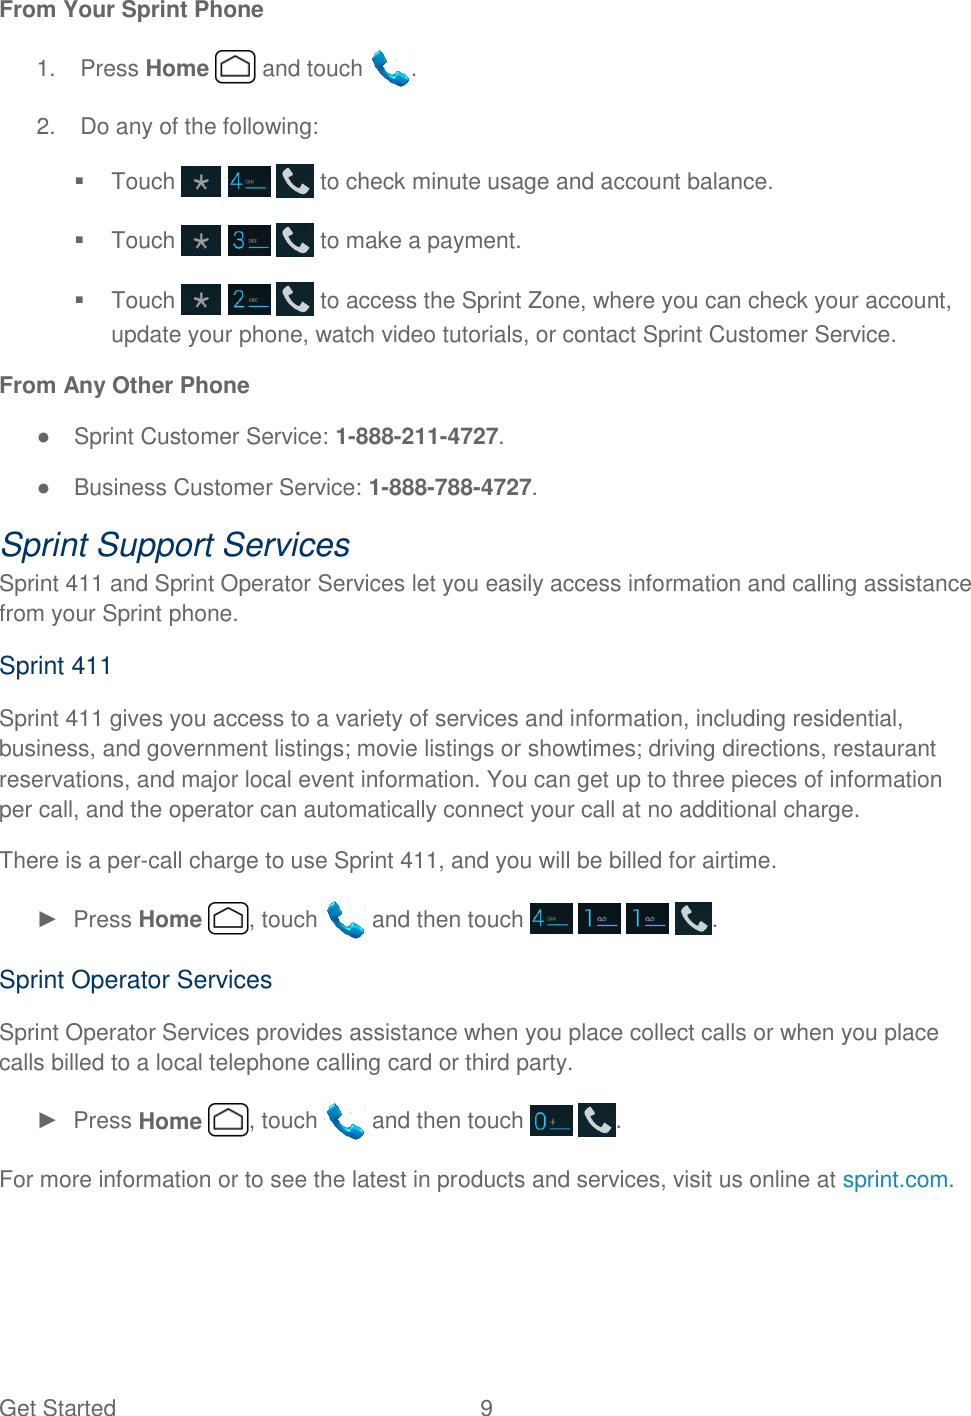 Get Started  9 From Your Sprint Phone 1.  Press Home   and touch  .  2.  Do any of the following:   Touch       to check minute usage and account balance.   Touch       to make a payment.   Touch       to access the Sprint Zone, where you can check your account, update your phone, watch video tutorials, or contact Sprint Customer Service. From Any Other Phone ●  Sprint Customer Service: 1-888-211-4727. ●  Business Customer Service: 1-888-788-4727. Sprint Support Services Sprint 411 and Sprint Operator Services let you easily access information and calling assistance from your Sprint phone. Sprint 411 Sprint 411 gives you access to a variety of services and information, including residential, business, and government listings; movie listings or showtimes; driving directions, restaurant reservations, and major local event information. You can get up to three pieces of information per call, and the operator can automatically connect your call at no additional charge. There is a per-call charge to use Sprint 411, and you will be billed for airtime. ►  Press Home  , touch   and then touch        . Sprint Operator Services Sprint Operator Services provides assistance when you place collect calls or when you place calls billed to a local telephone calling card or third party. ►  Press Home  , touch   and then touch    . For more information or to see the latest in products and services, visit us online at sprint.com.